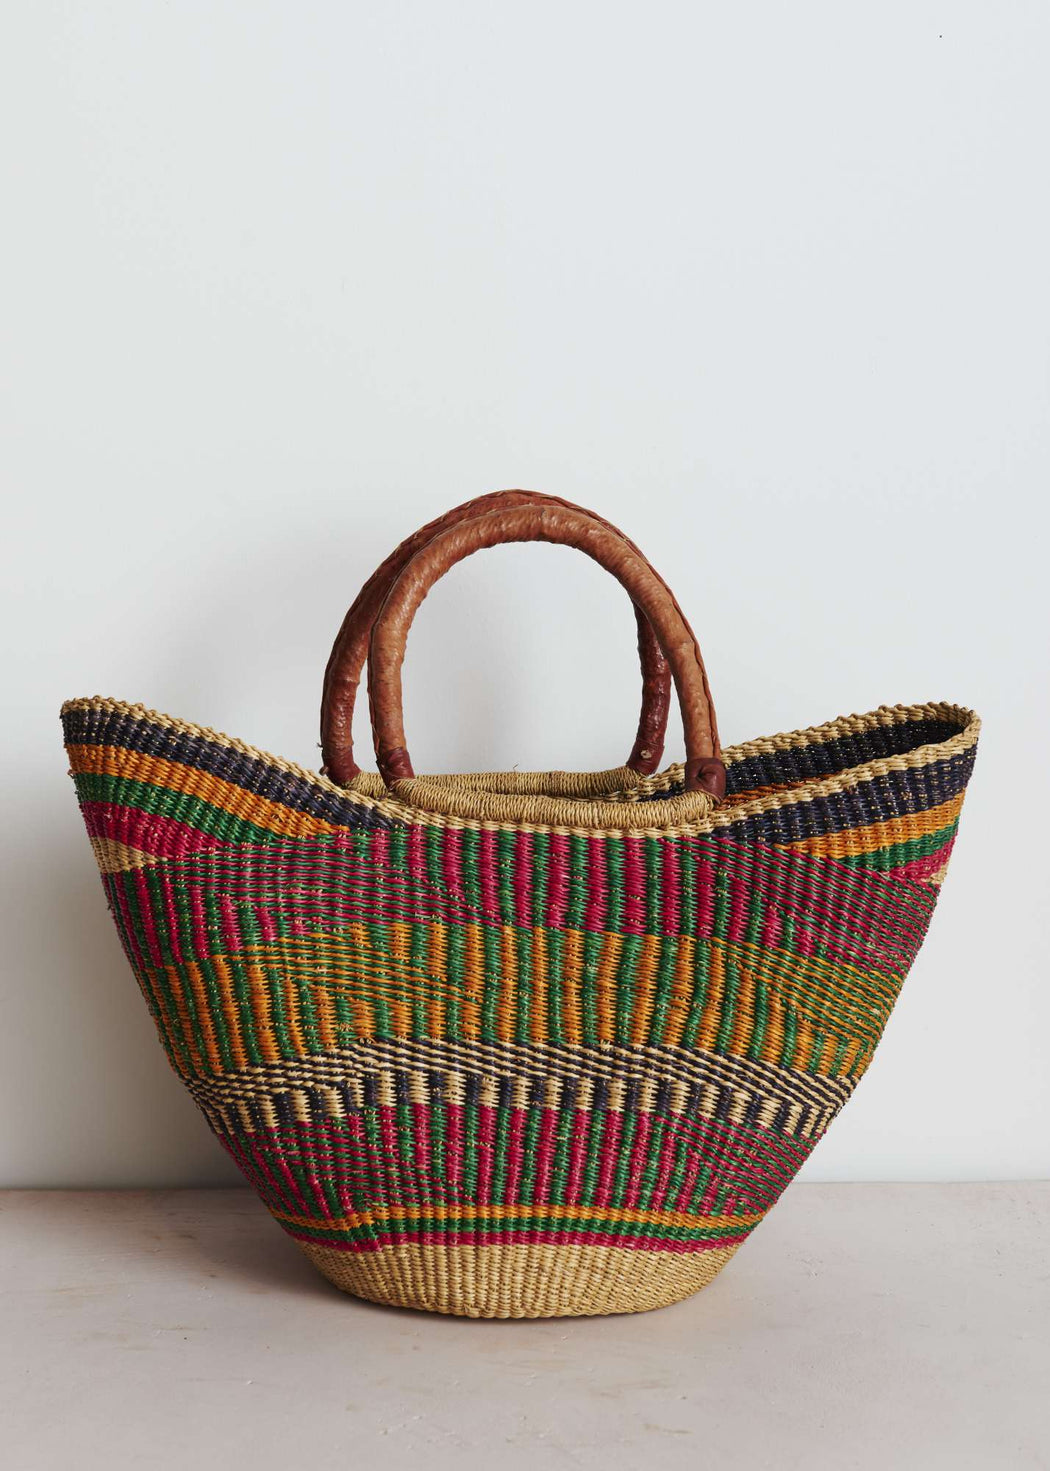 this is a shop, bag, bolga, africa, colour, leather